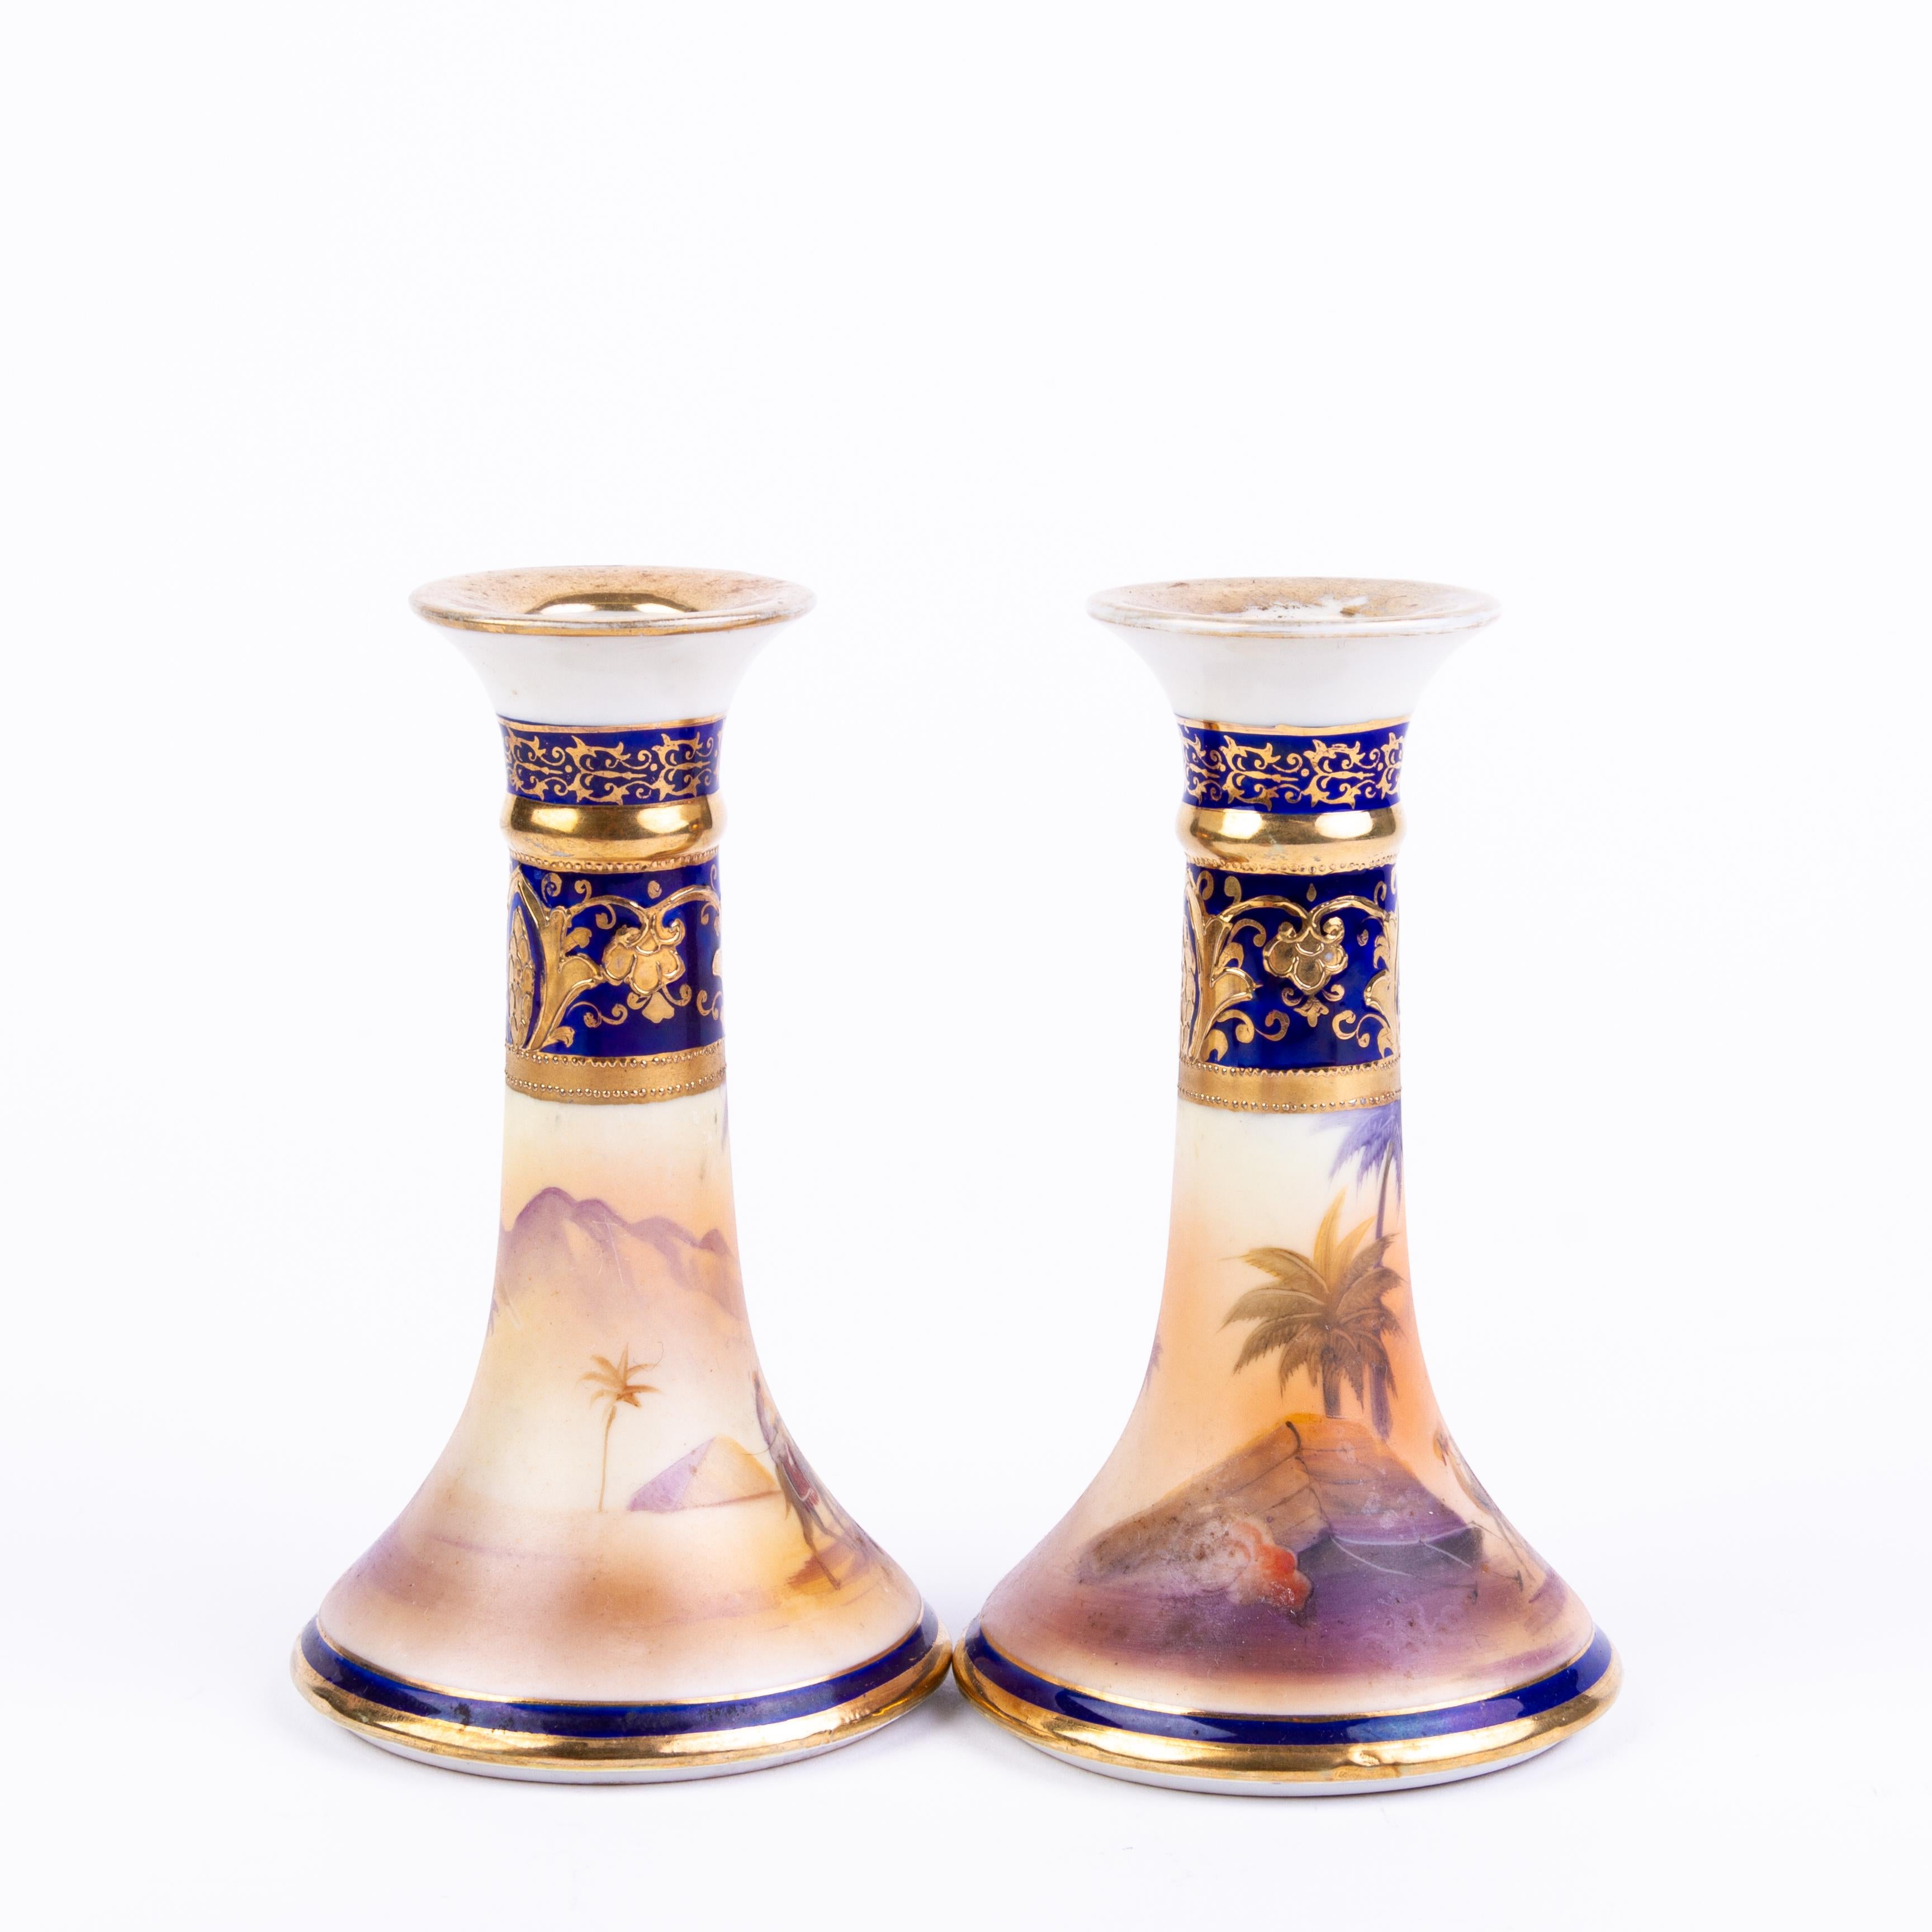 Japanese Art Deco Noritake Fine Gilt Porcelain Orientalist Candlesticks
Good condition.
From a private collection.
Free international shipping.